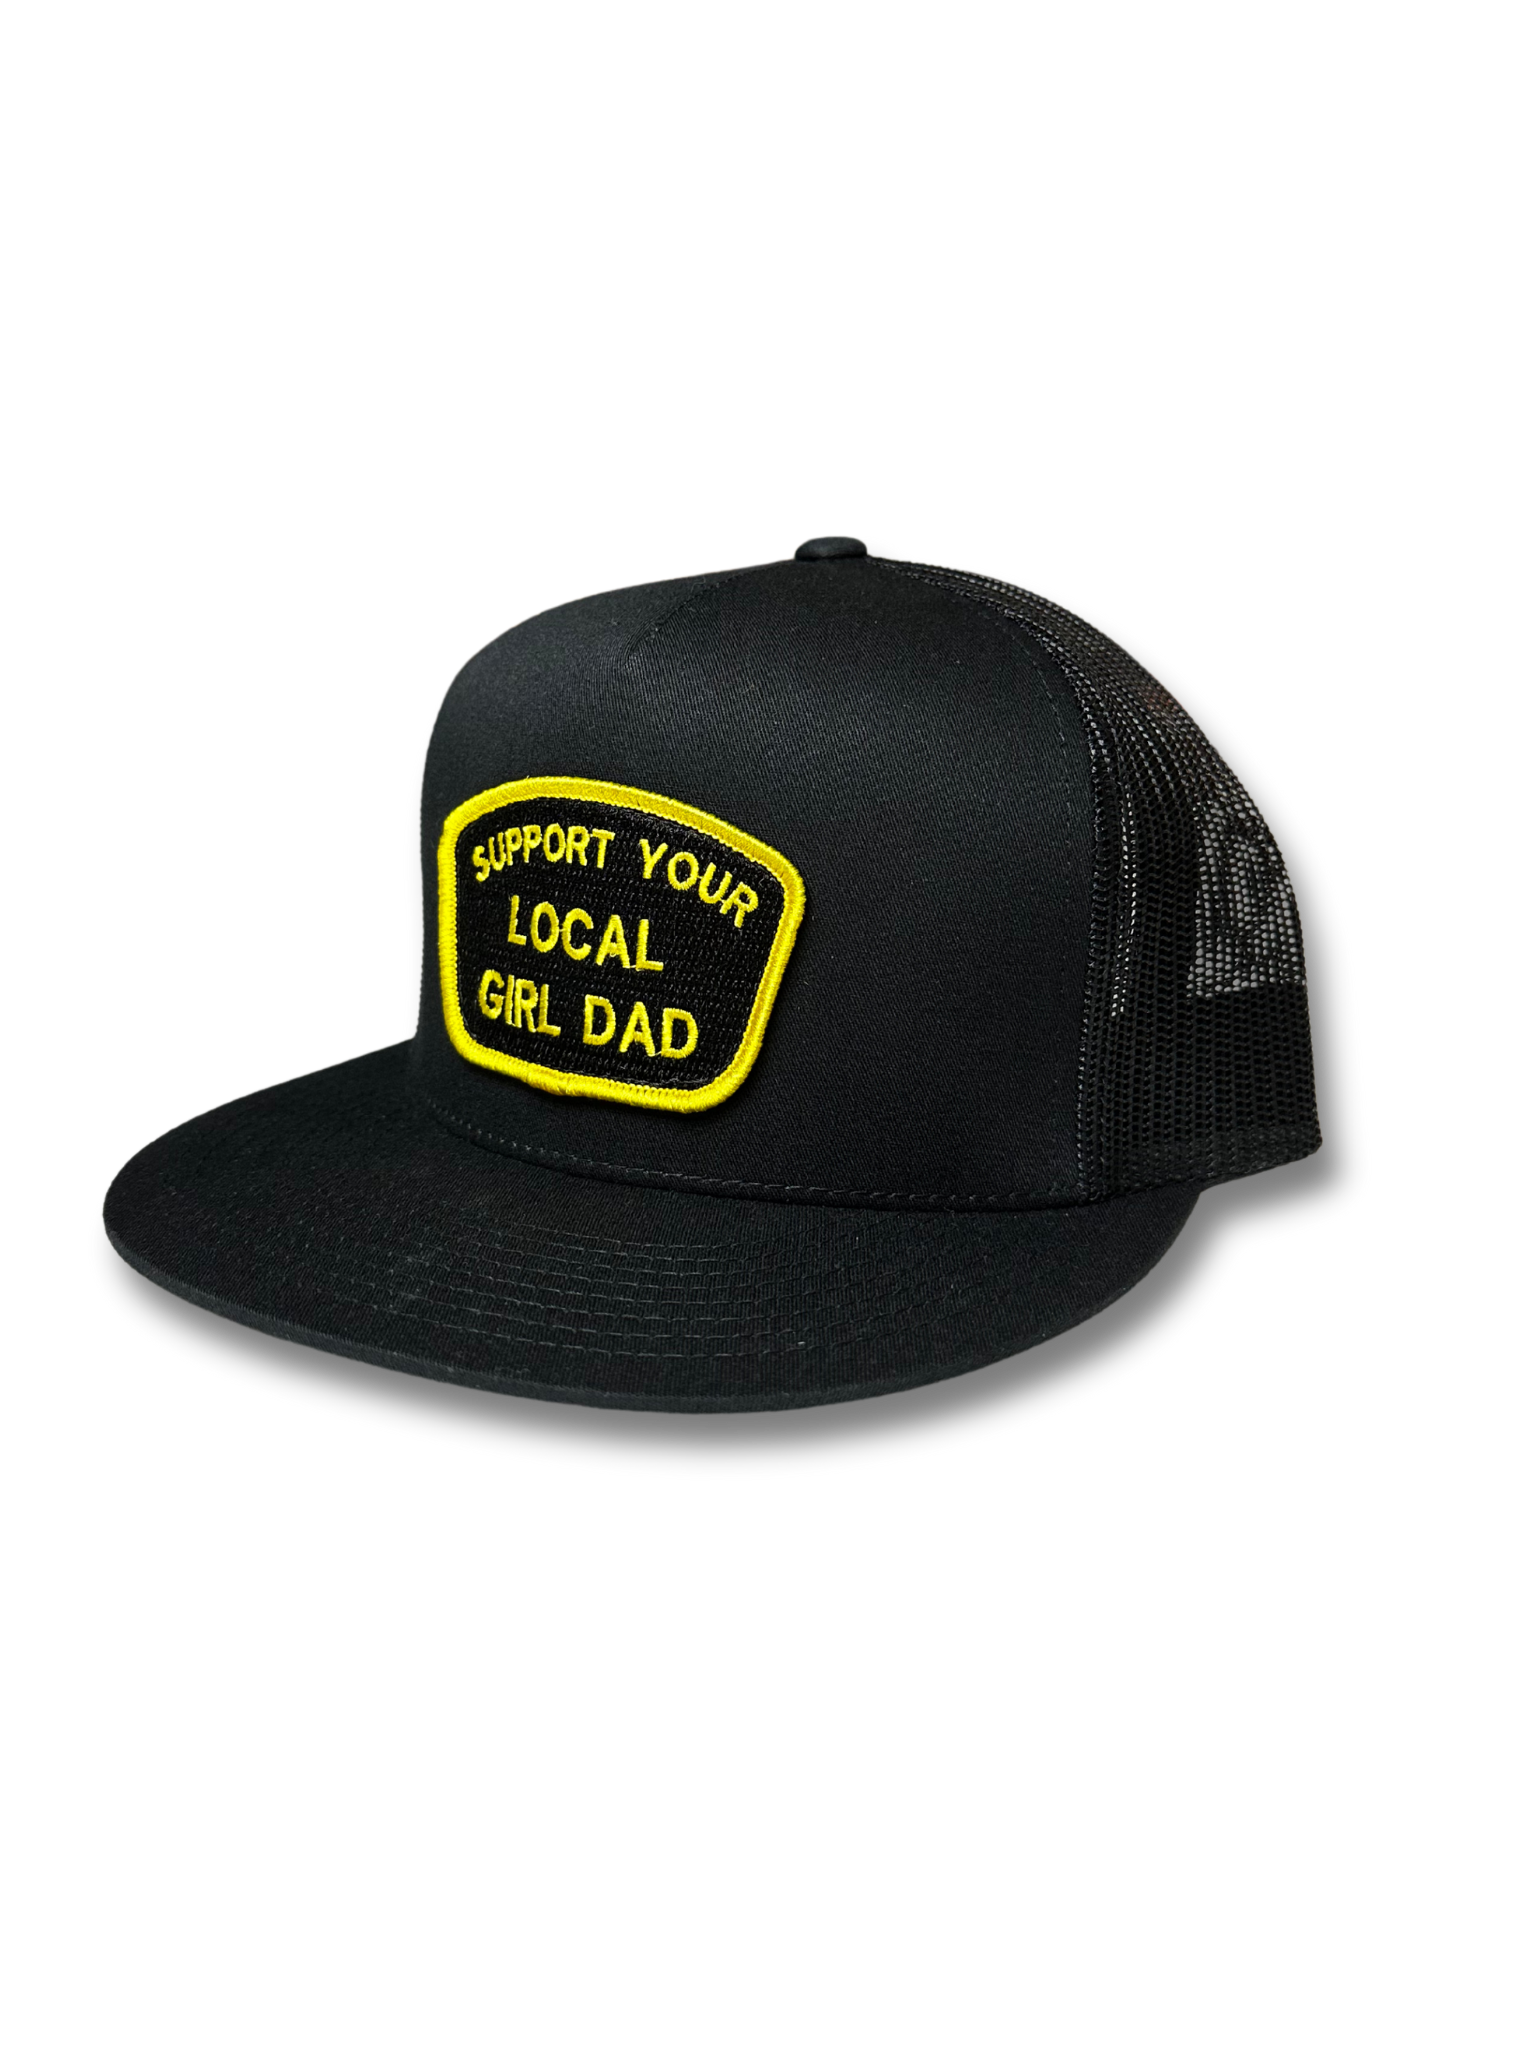 Support Your Local Girl Dad Flat Bill Trucker